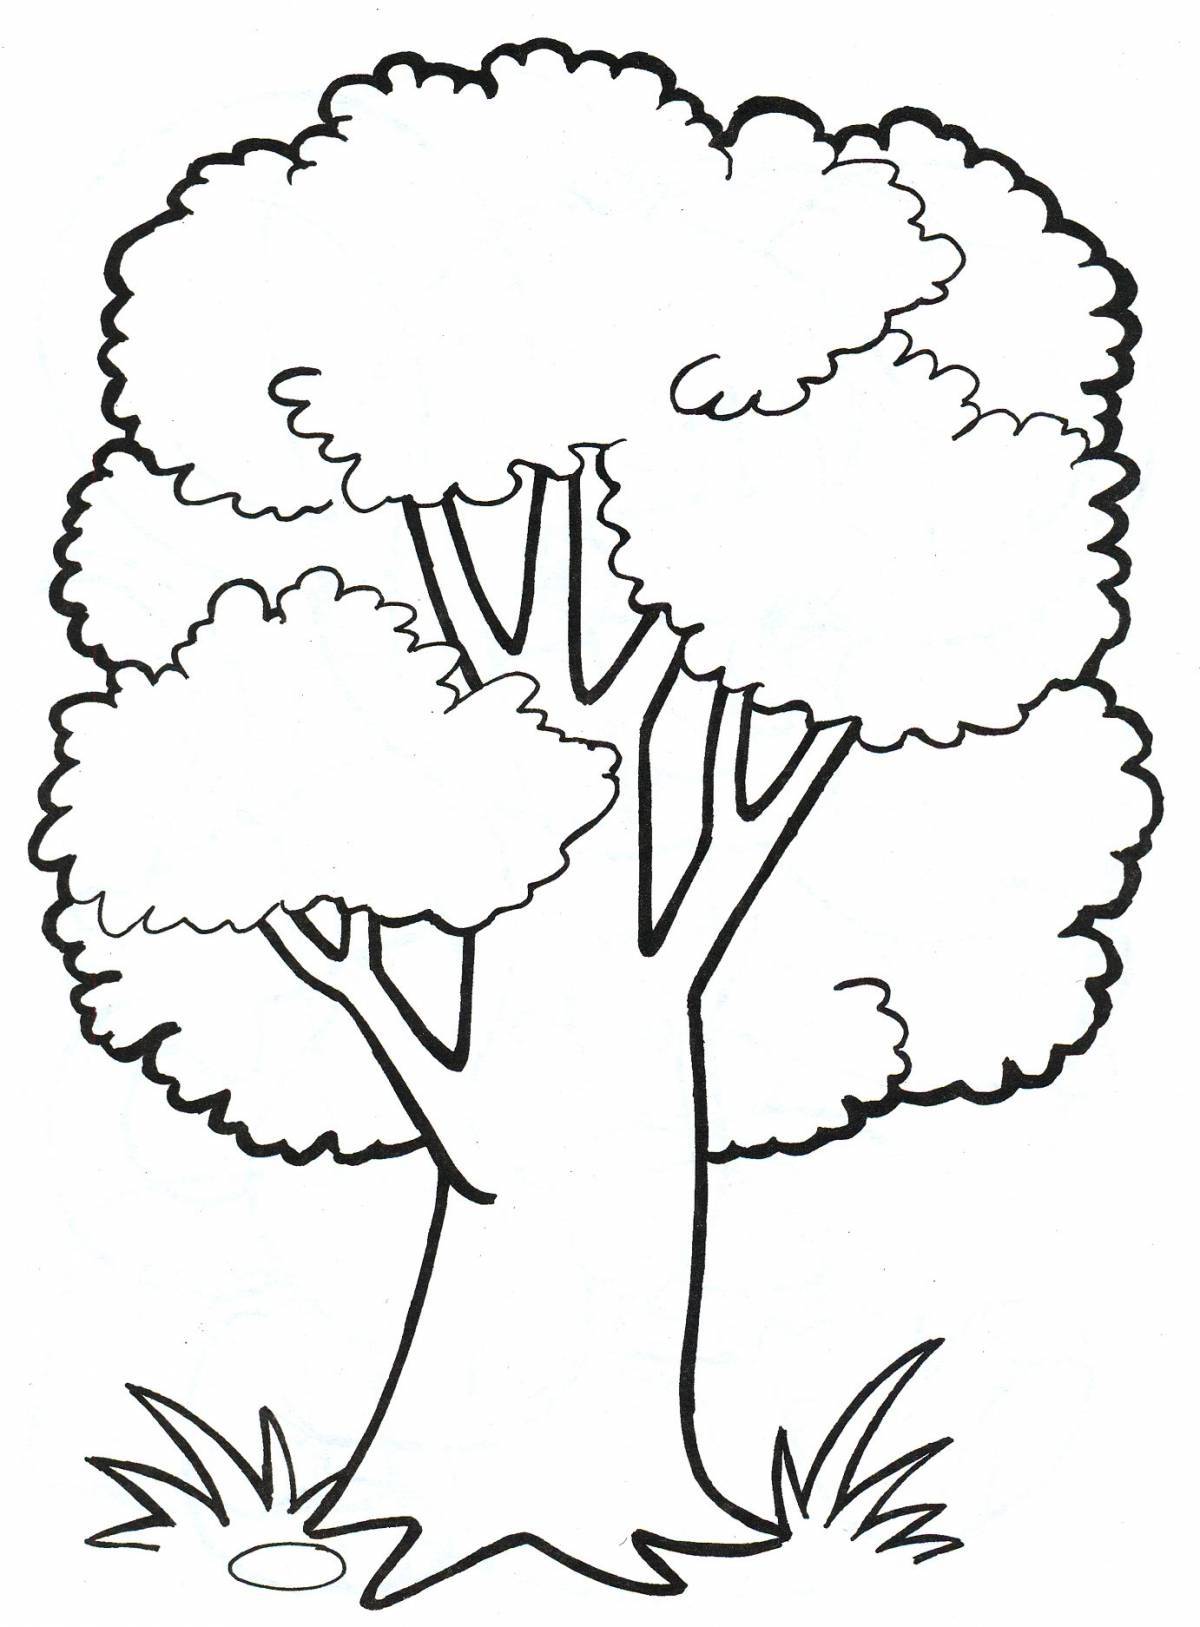 Coloring tree jubilant for children